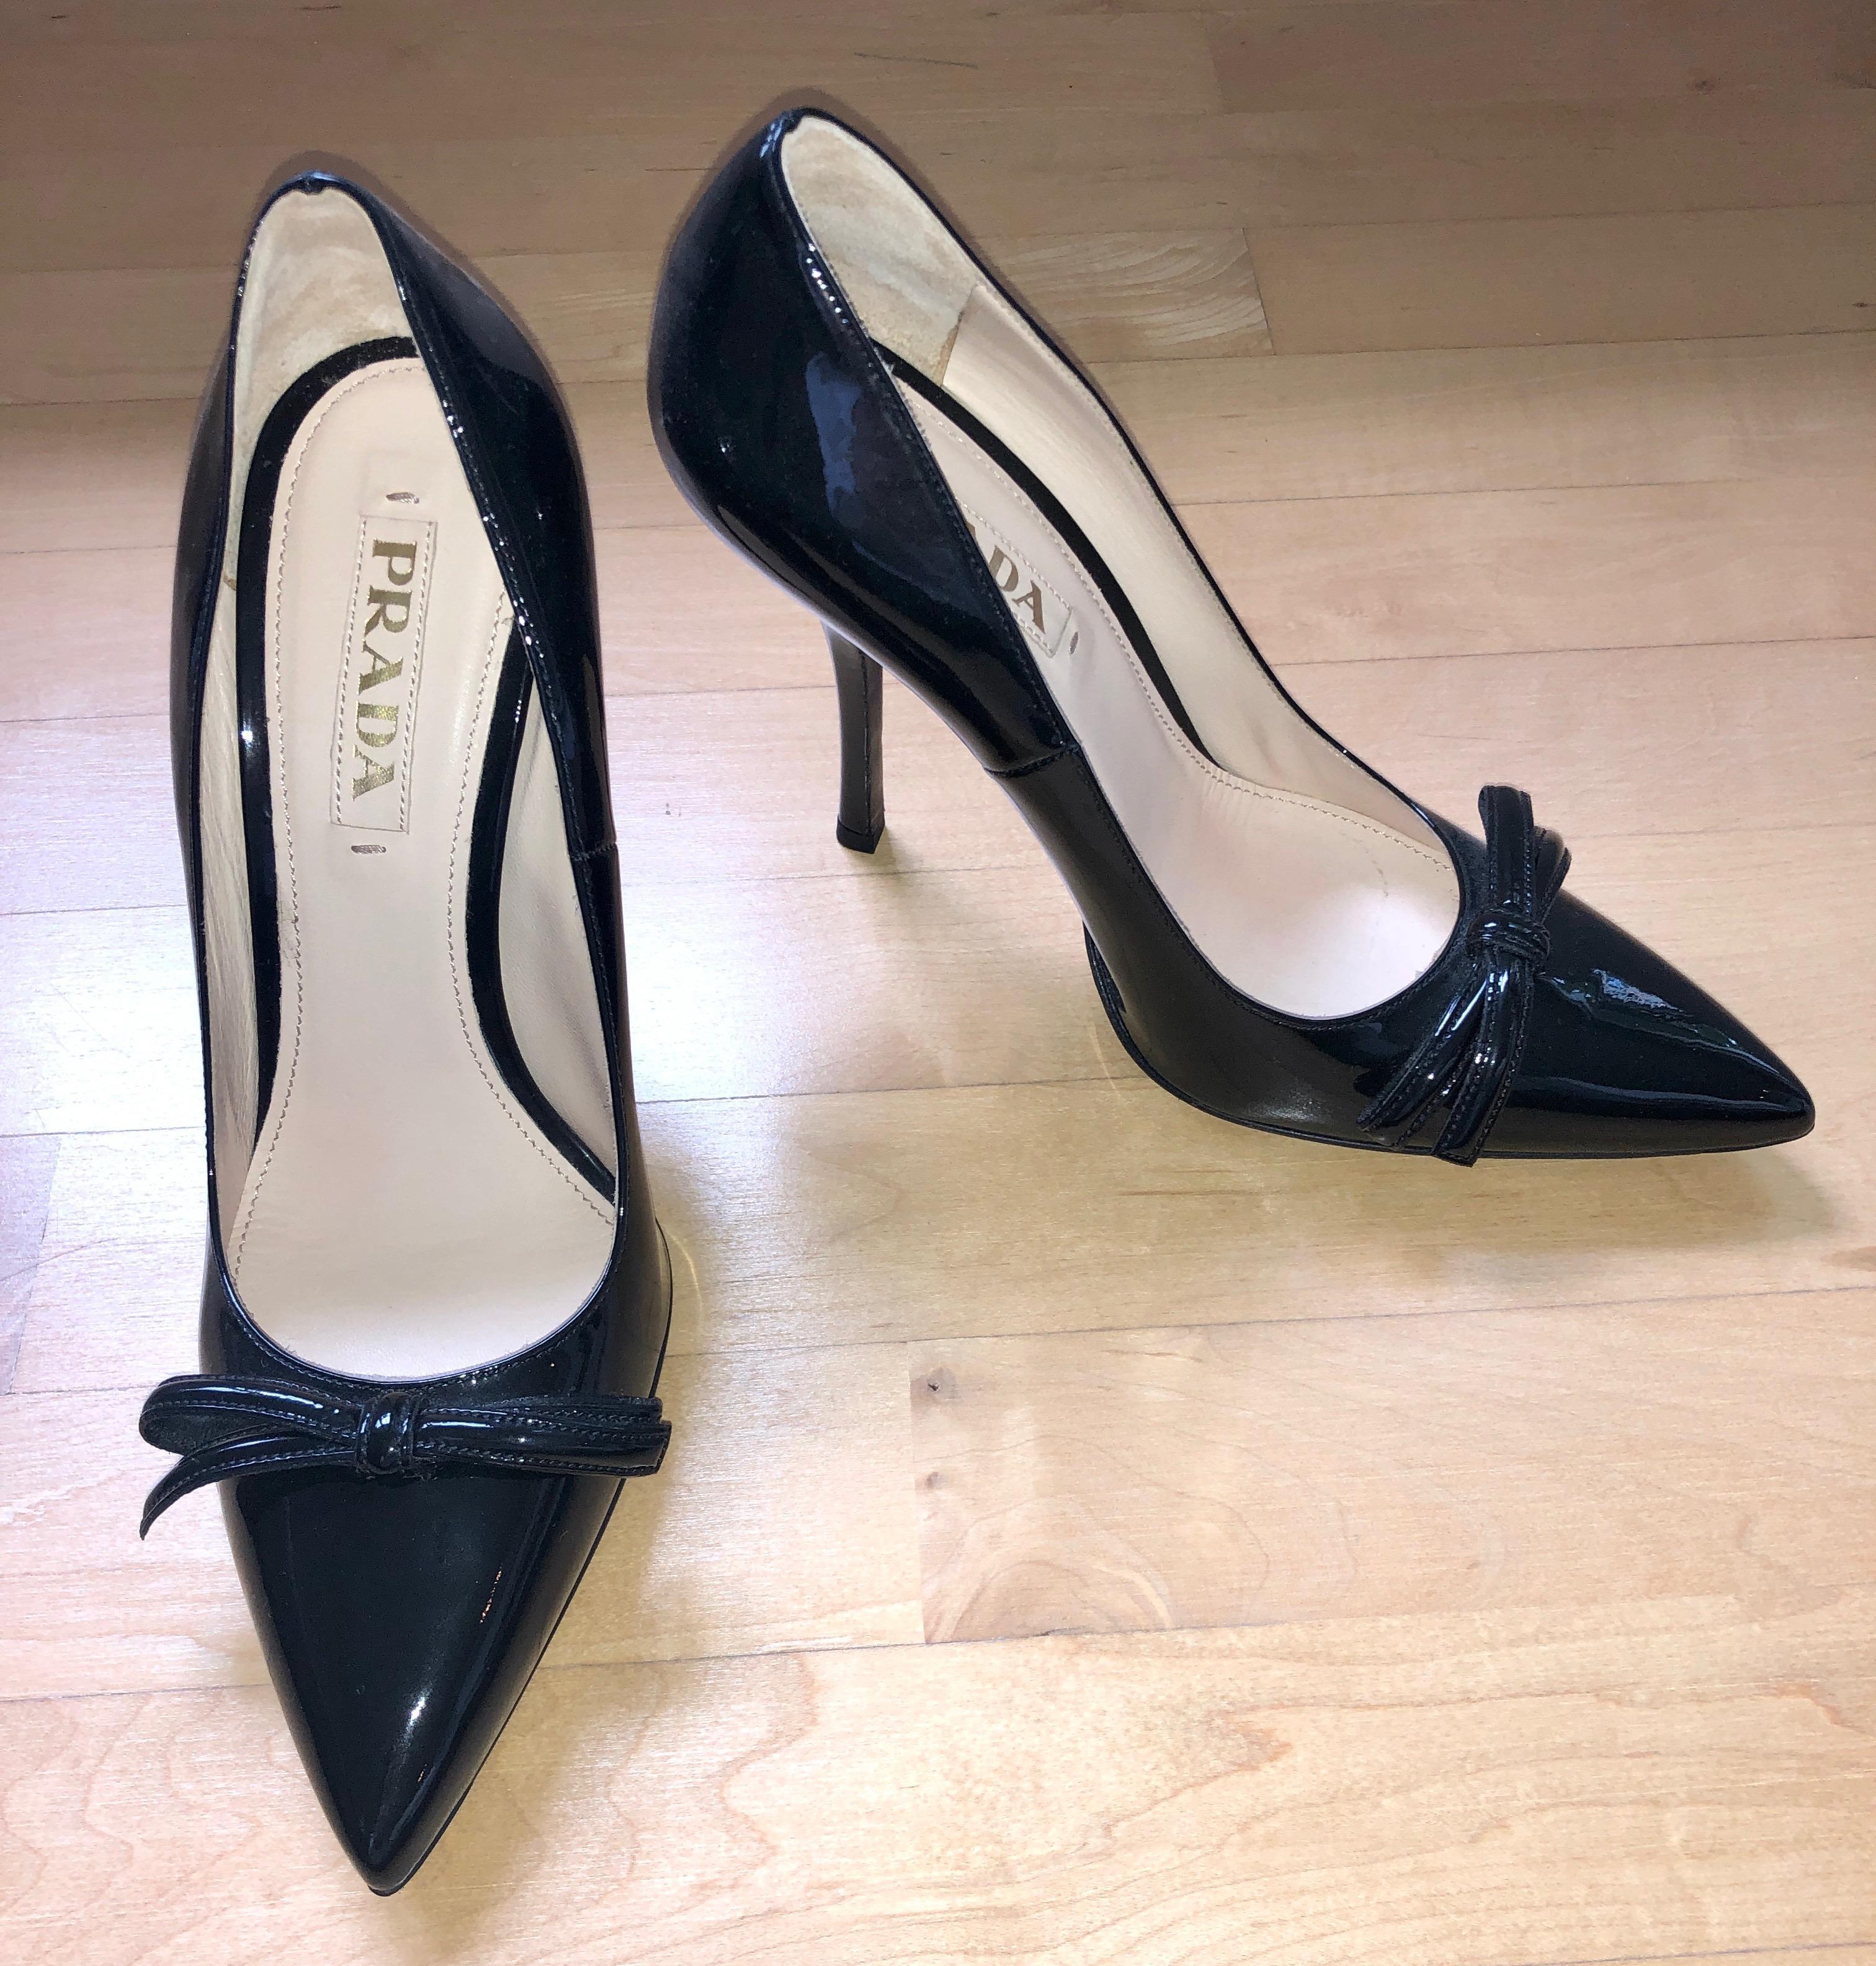 Make:  Miuccia Prada
Place of Manufacture:  Italy
Color:  Black
Size:  39.5
Materials:  Patent leather and leather
Condition:  Only used in the shoe department where purchased
Dust bag included with purchase

Offered is a pair of Prada black patent